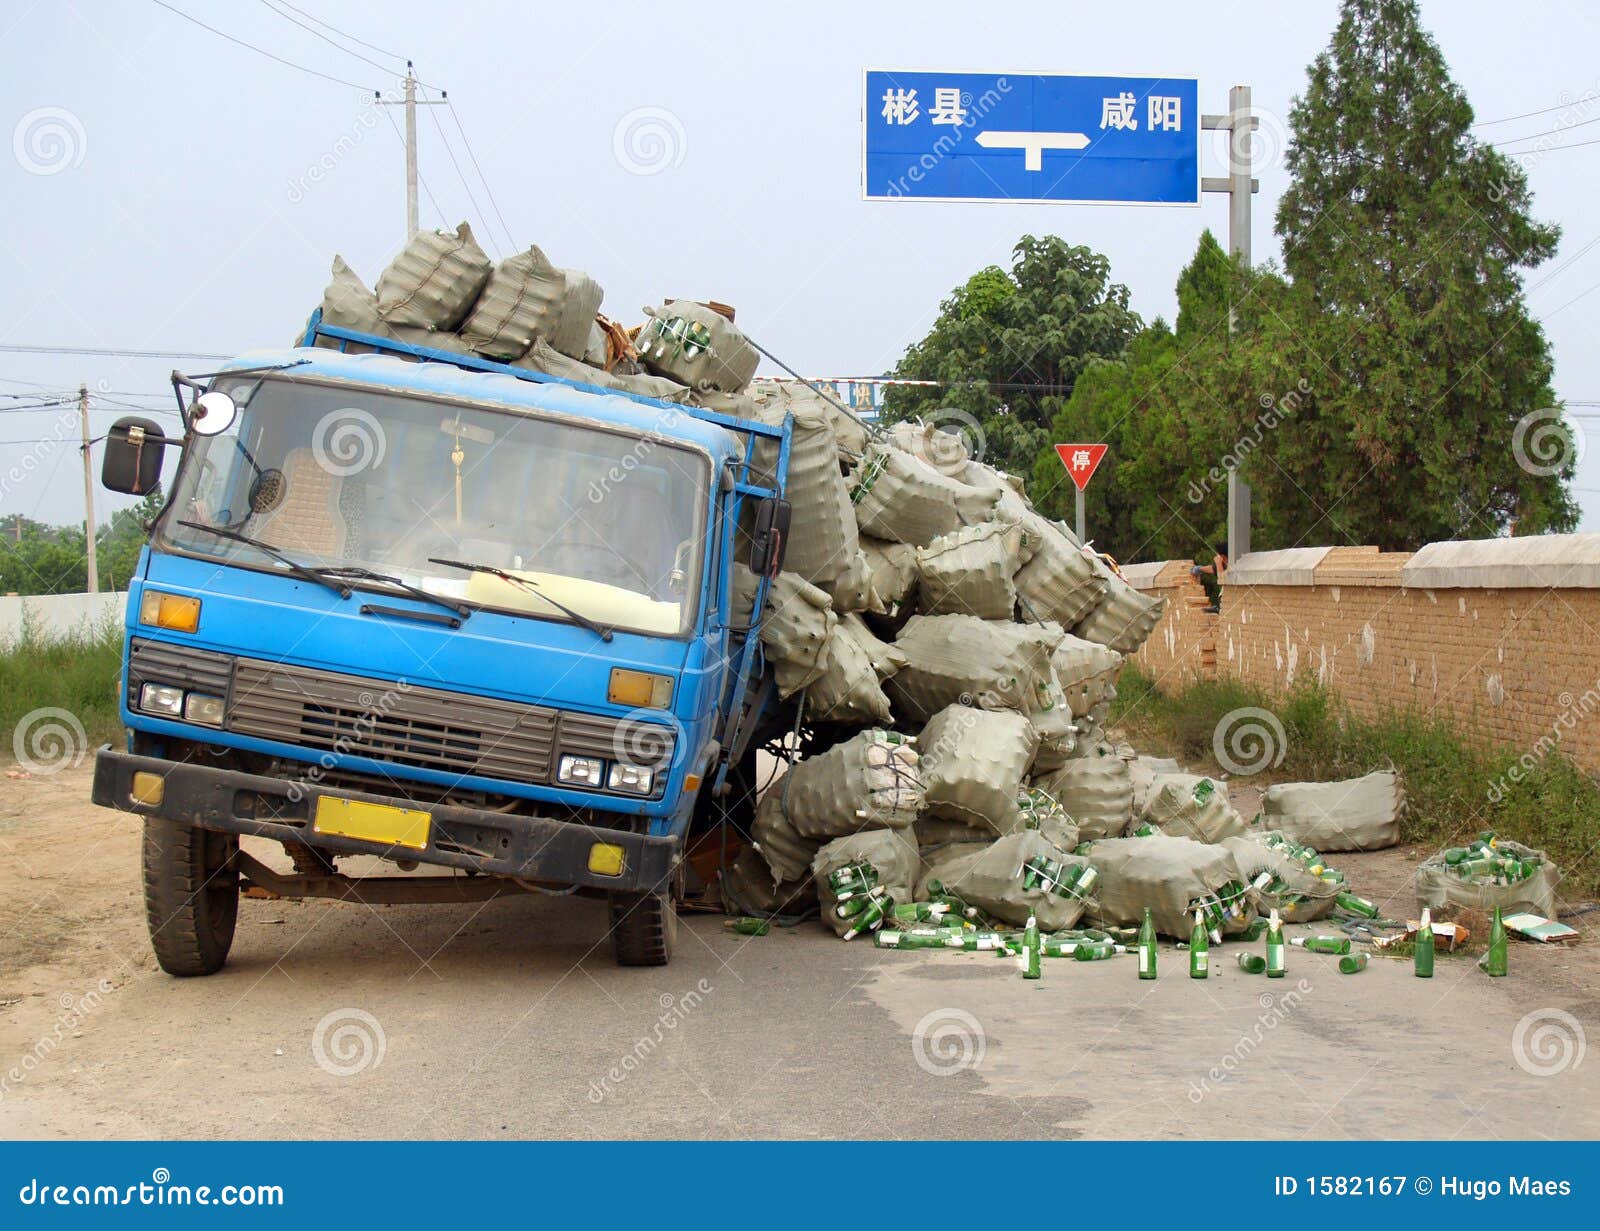 Overloaded Chinese Truck Accident Stock Image Image Of Worn Spilled 1582167